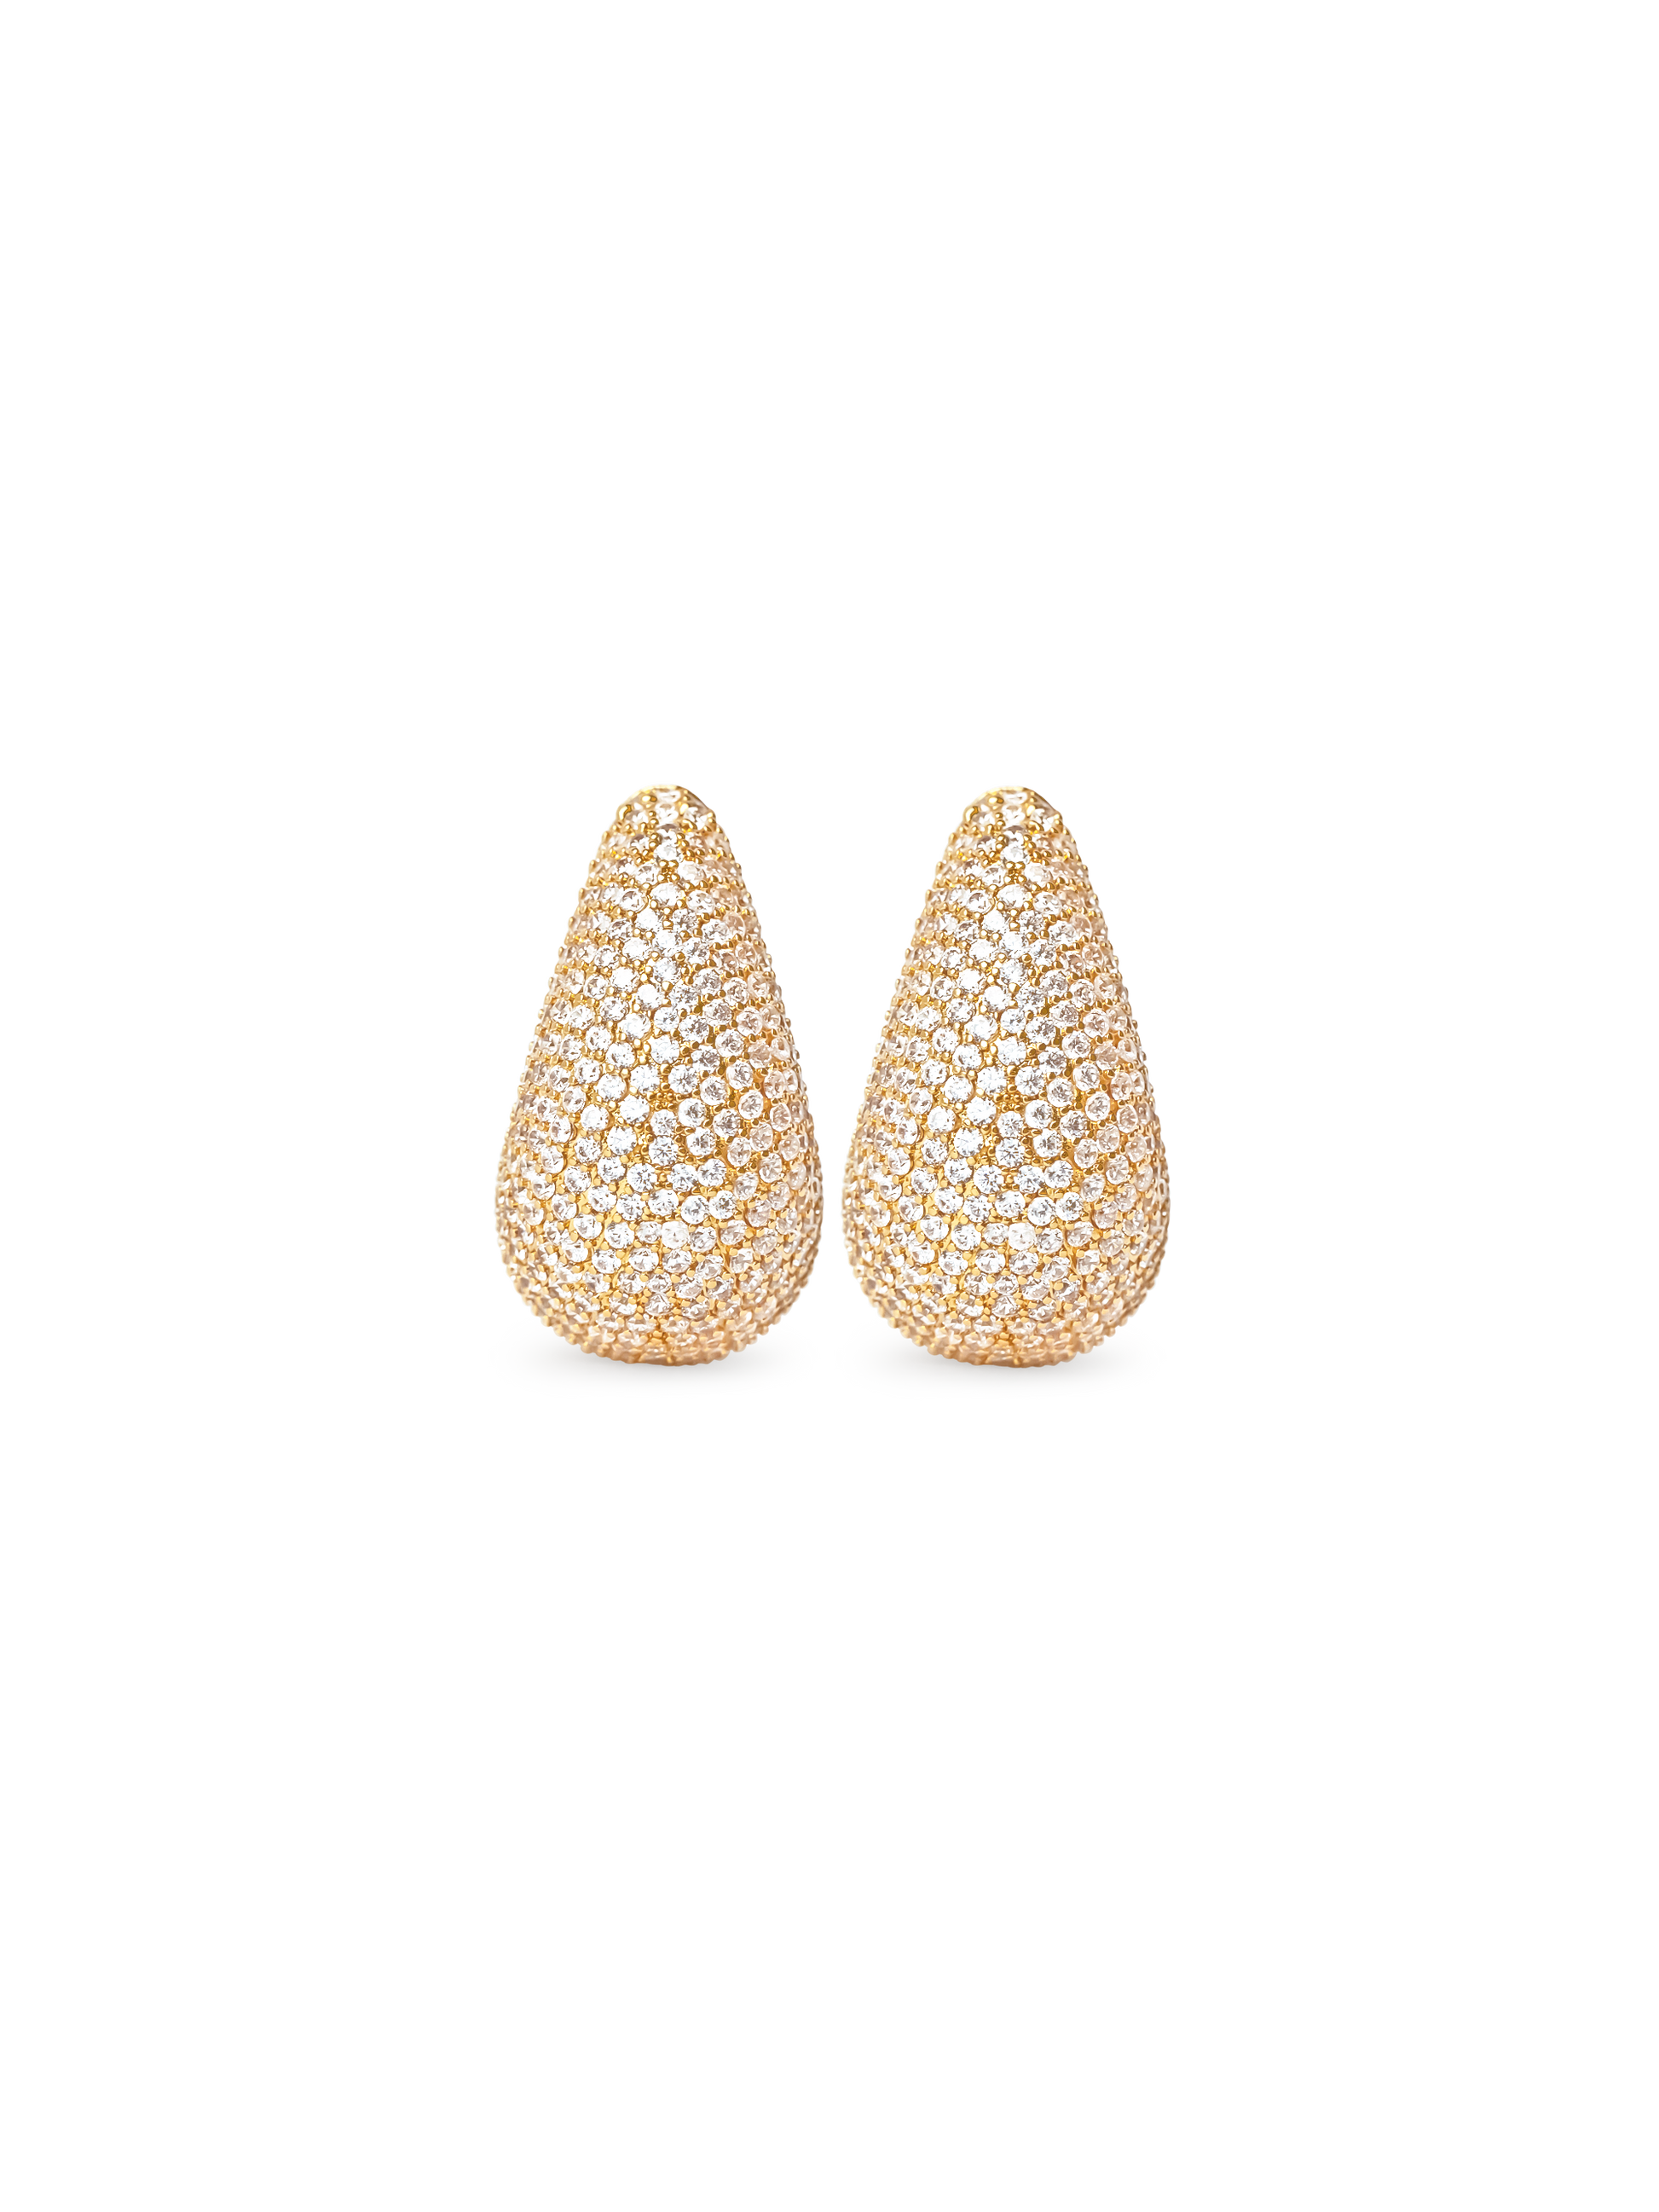 maxi pave drop earrings 18k gold plated brass